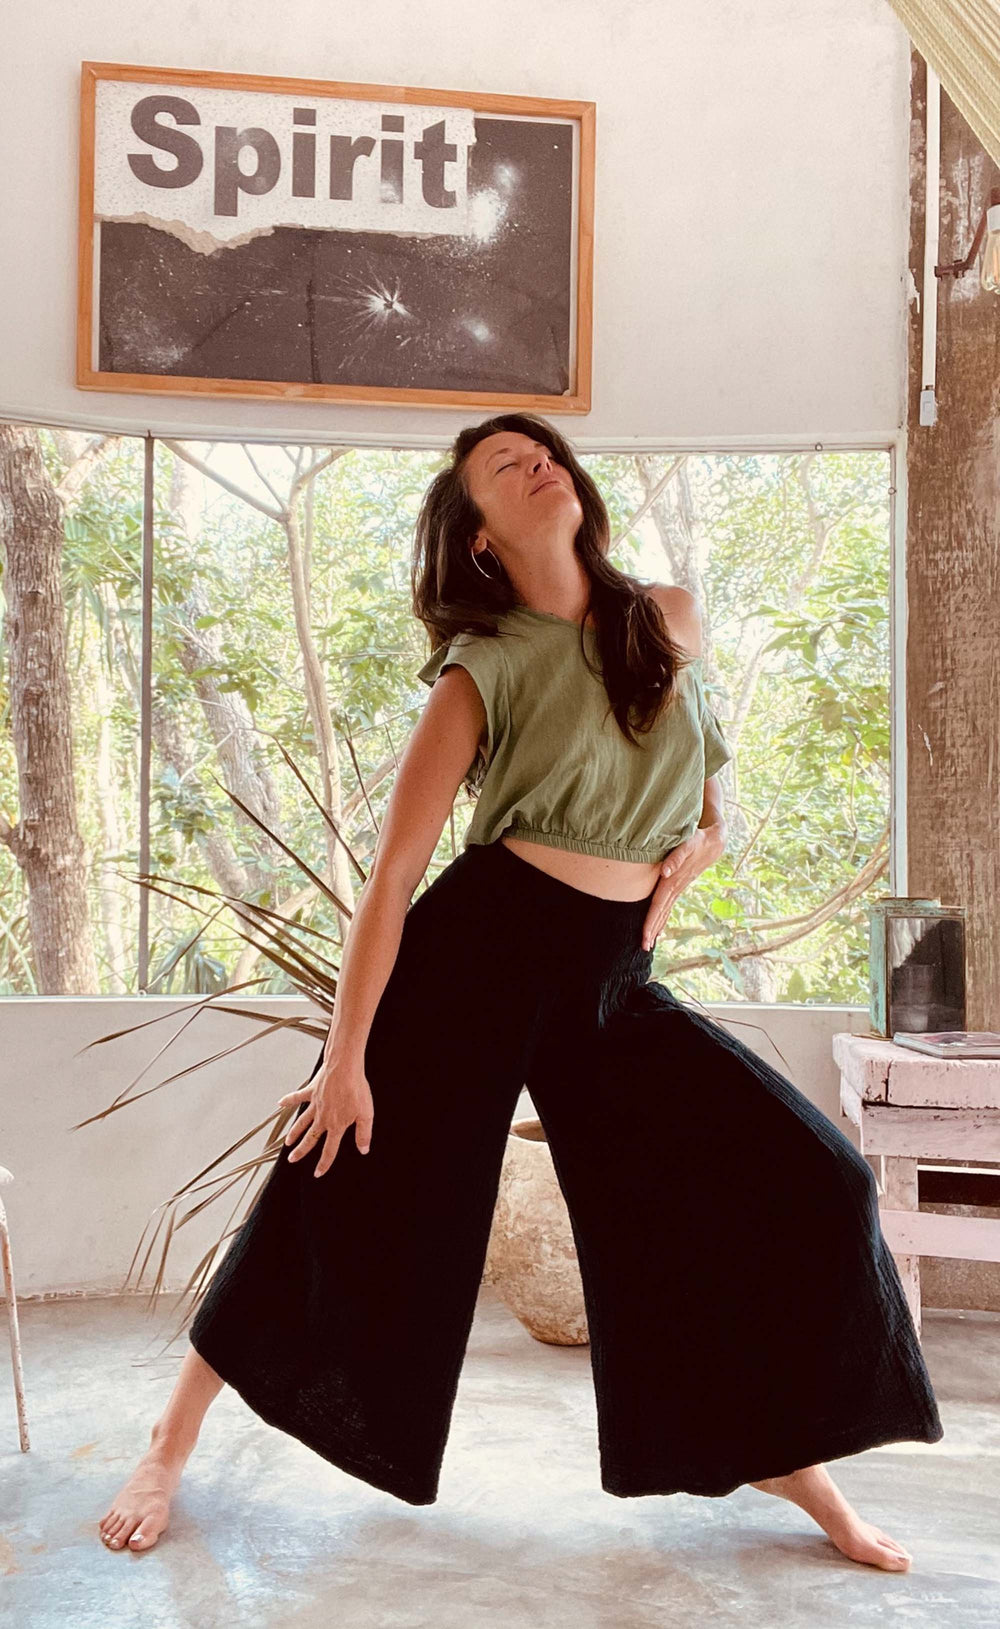 Woman poses in wide-legged stance wearing off-the-shoulder green crop top and black pants.